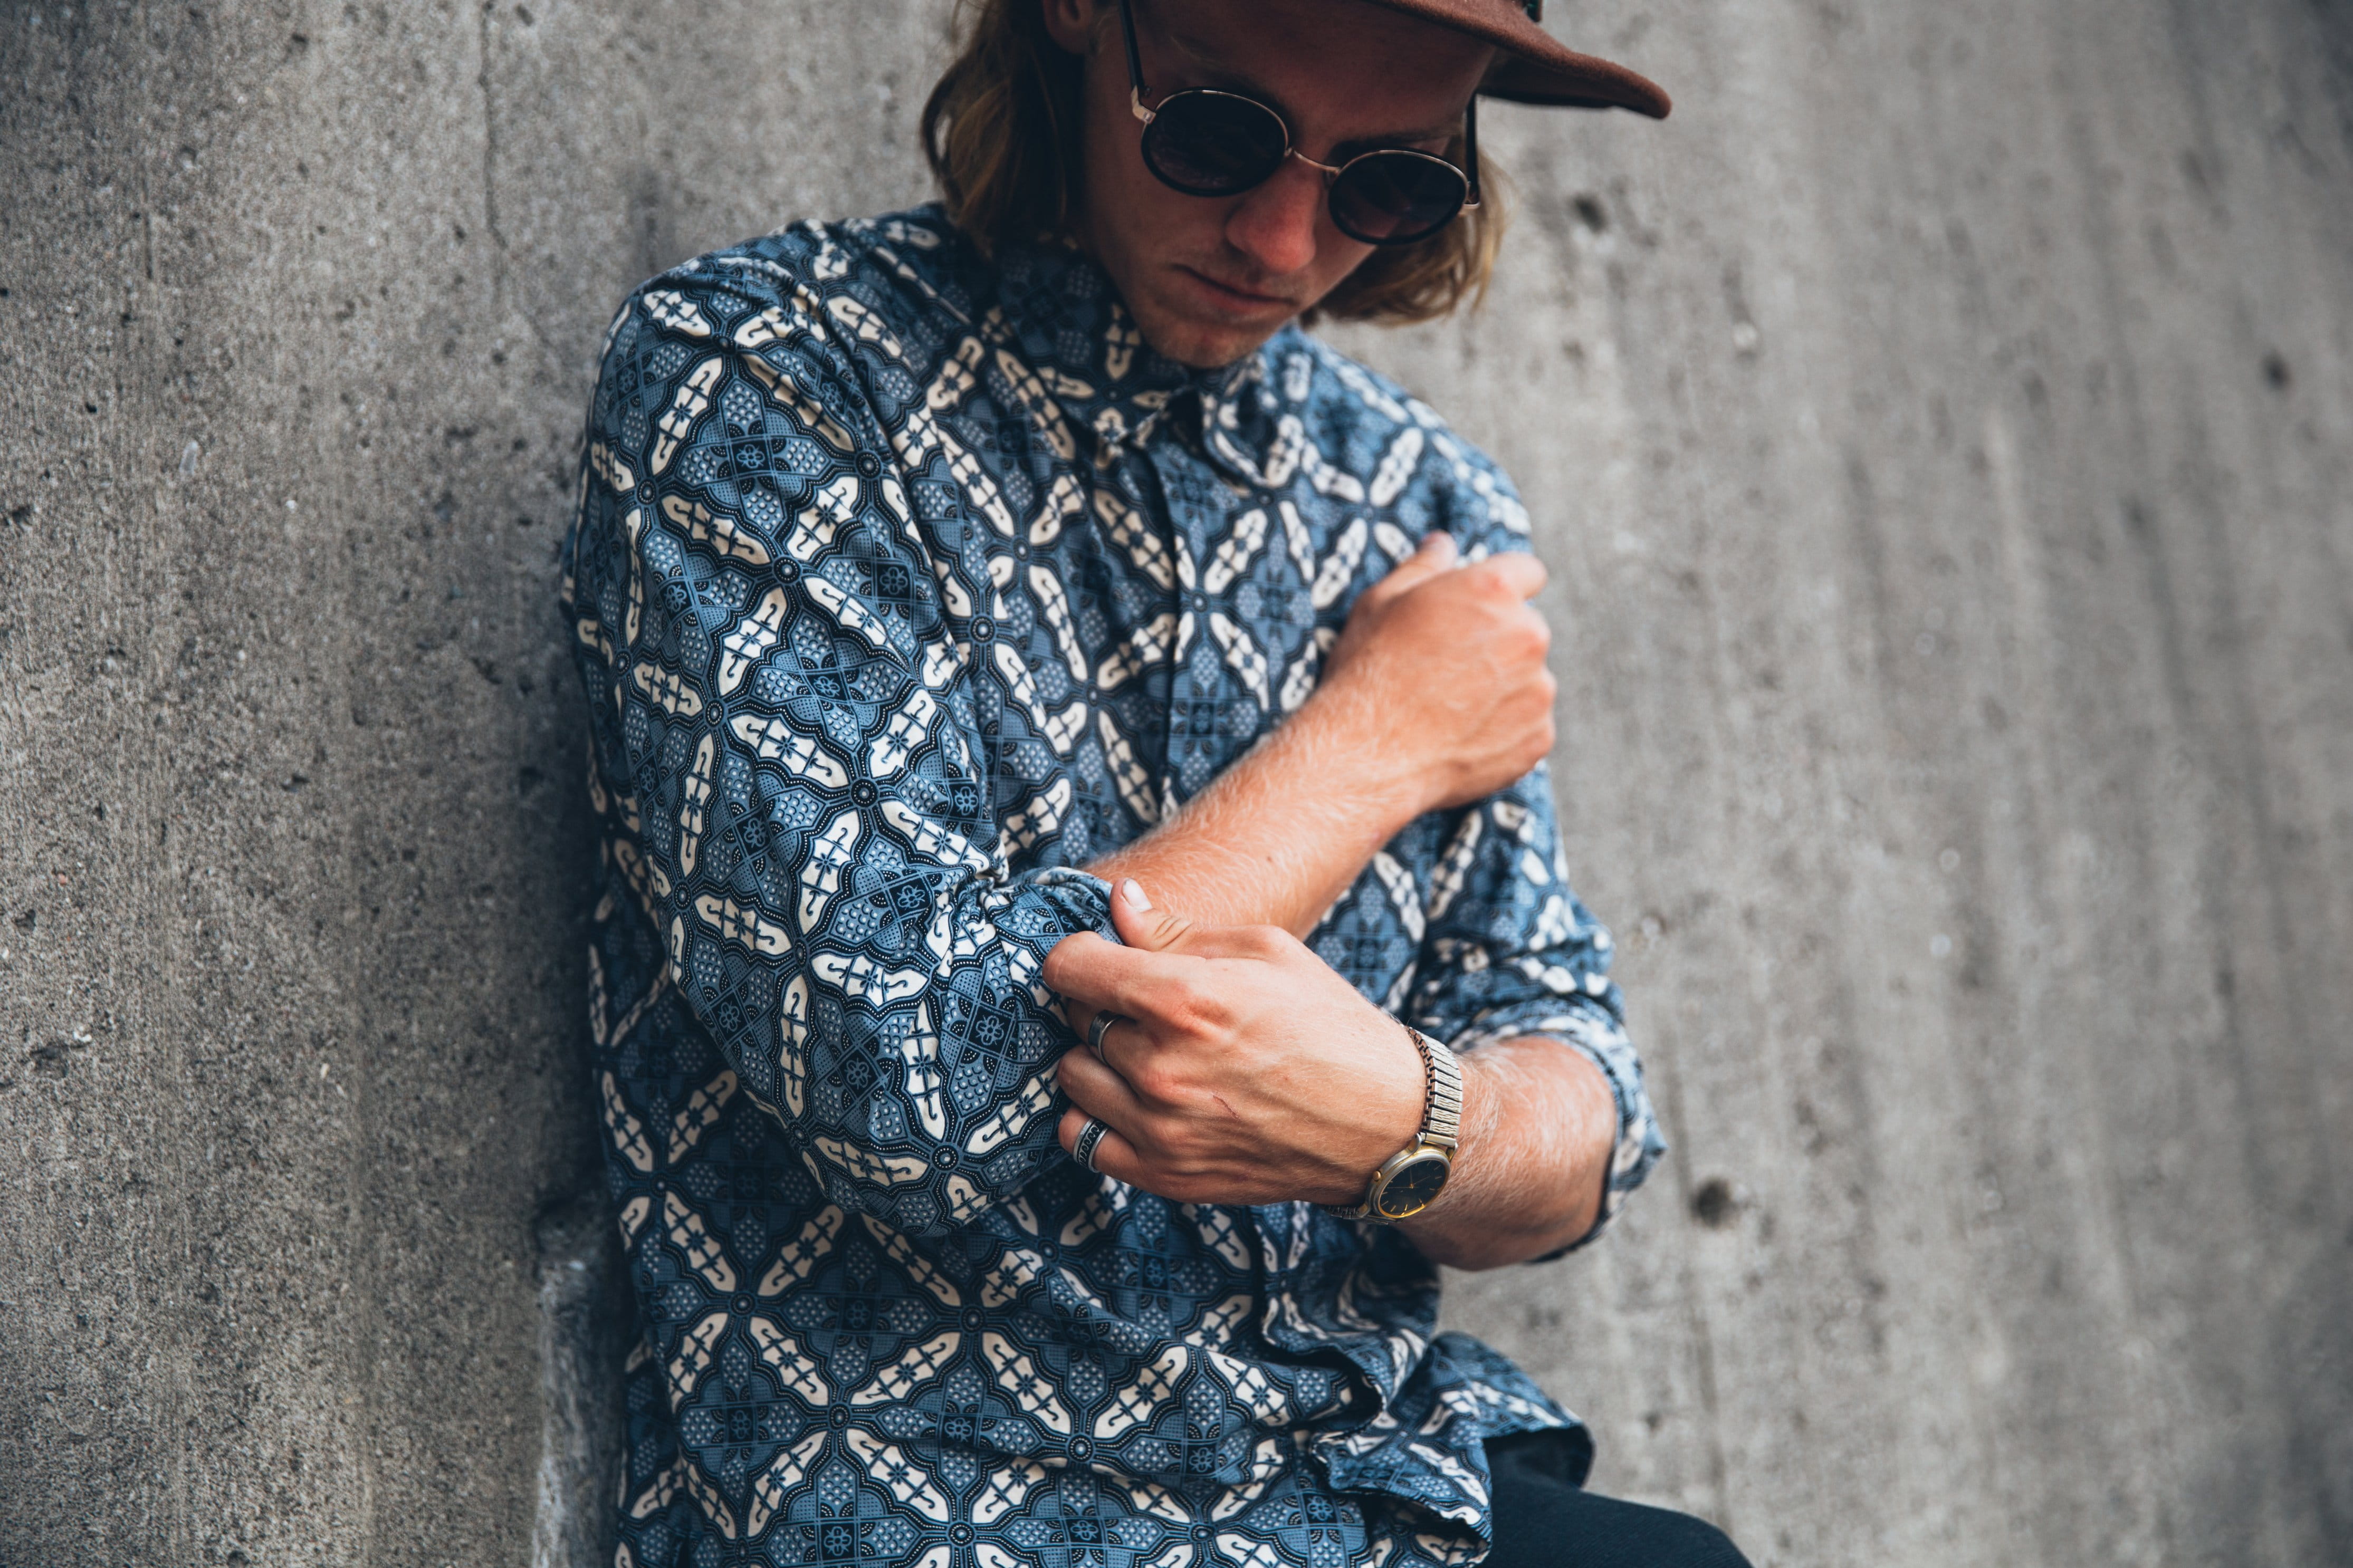 Young Man In Bright Fashion Photo, Men, Mens Fashion, Hipster